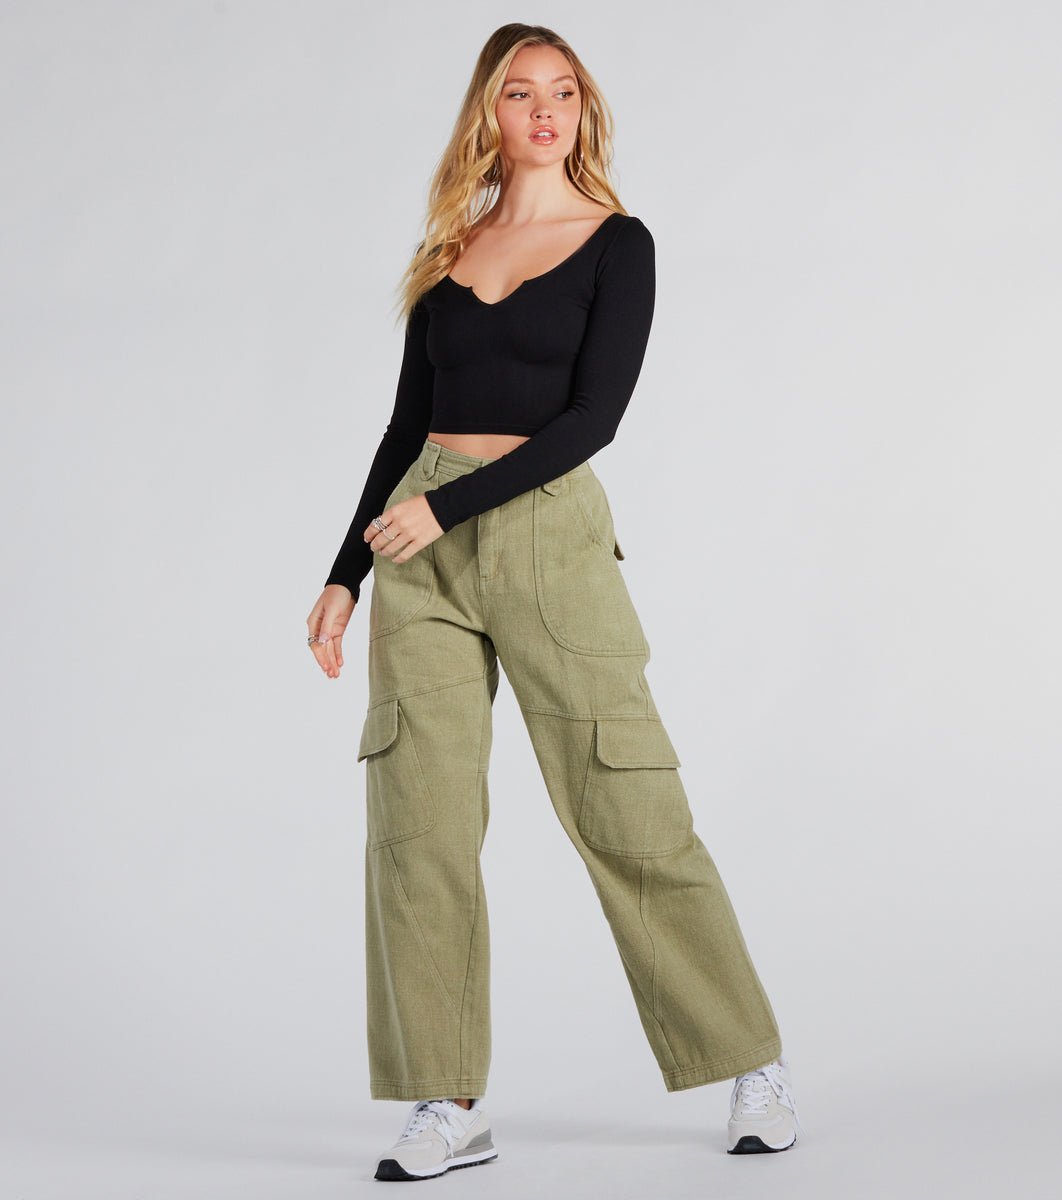 Cargo Pants for Women Dressy Casual Stretch Twill Cropped Wide Leg